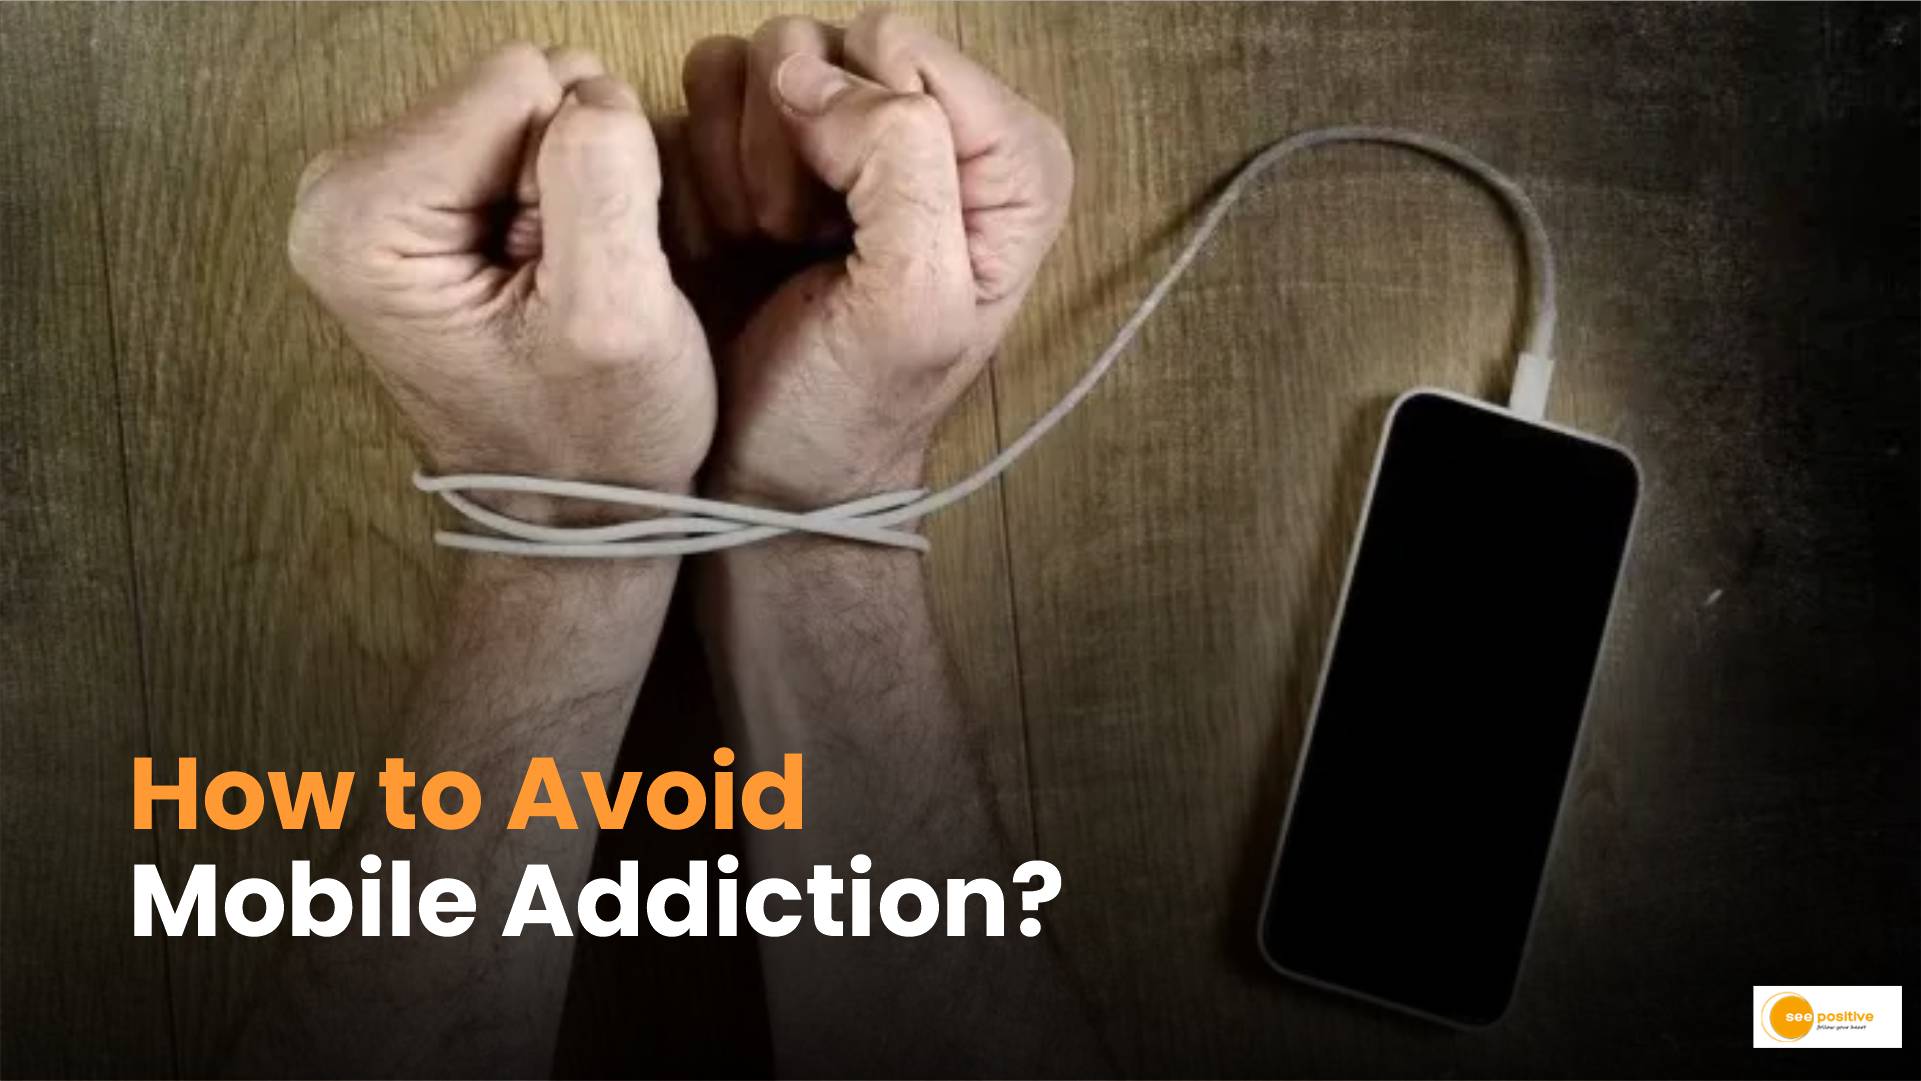 Tips to get rid of mobile addiction